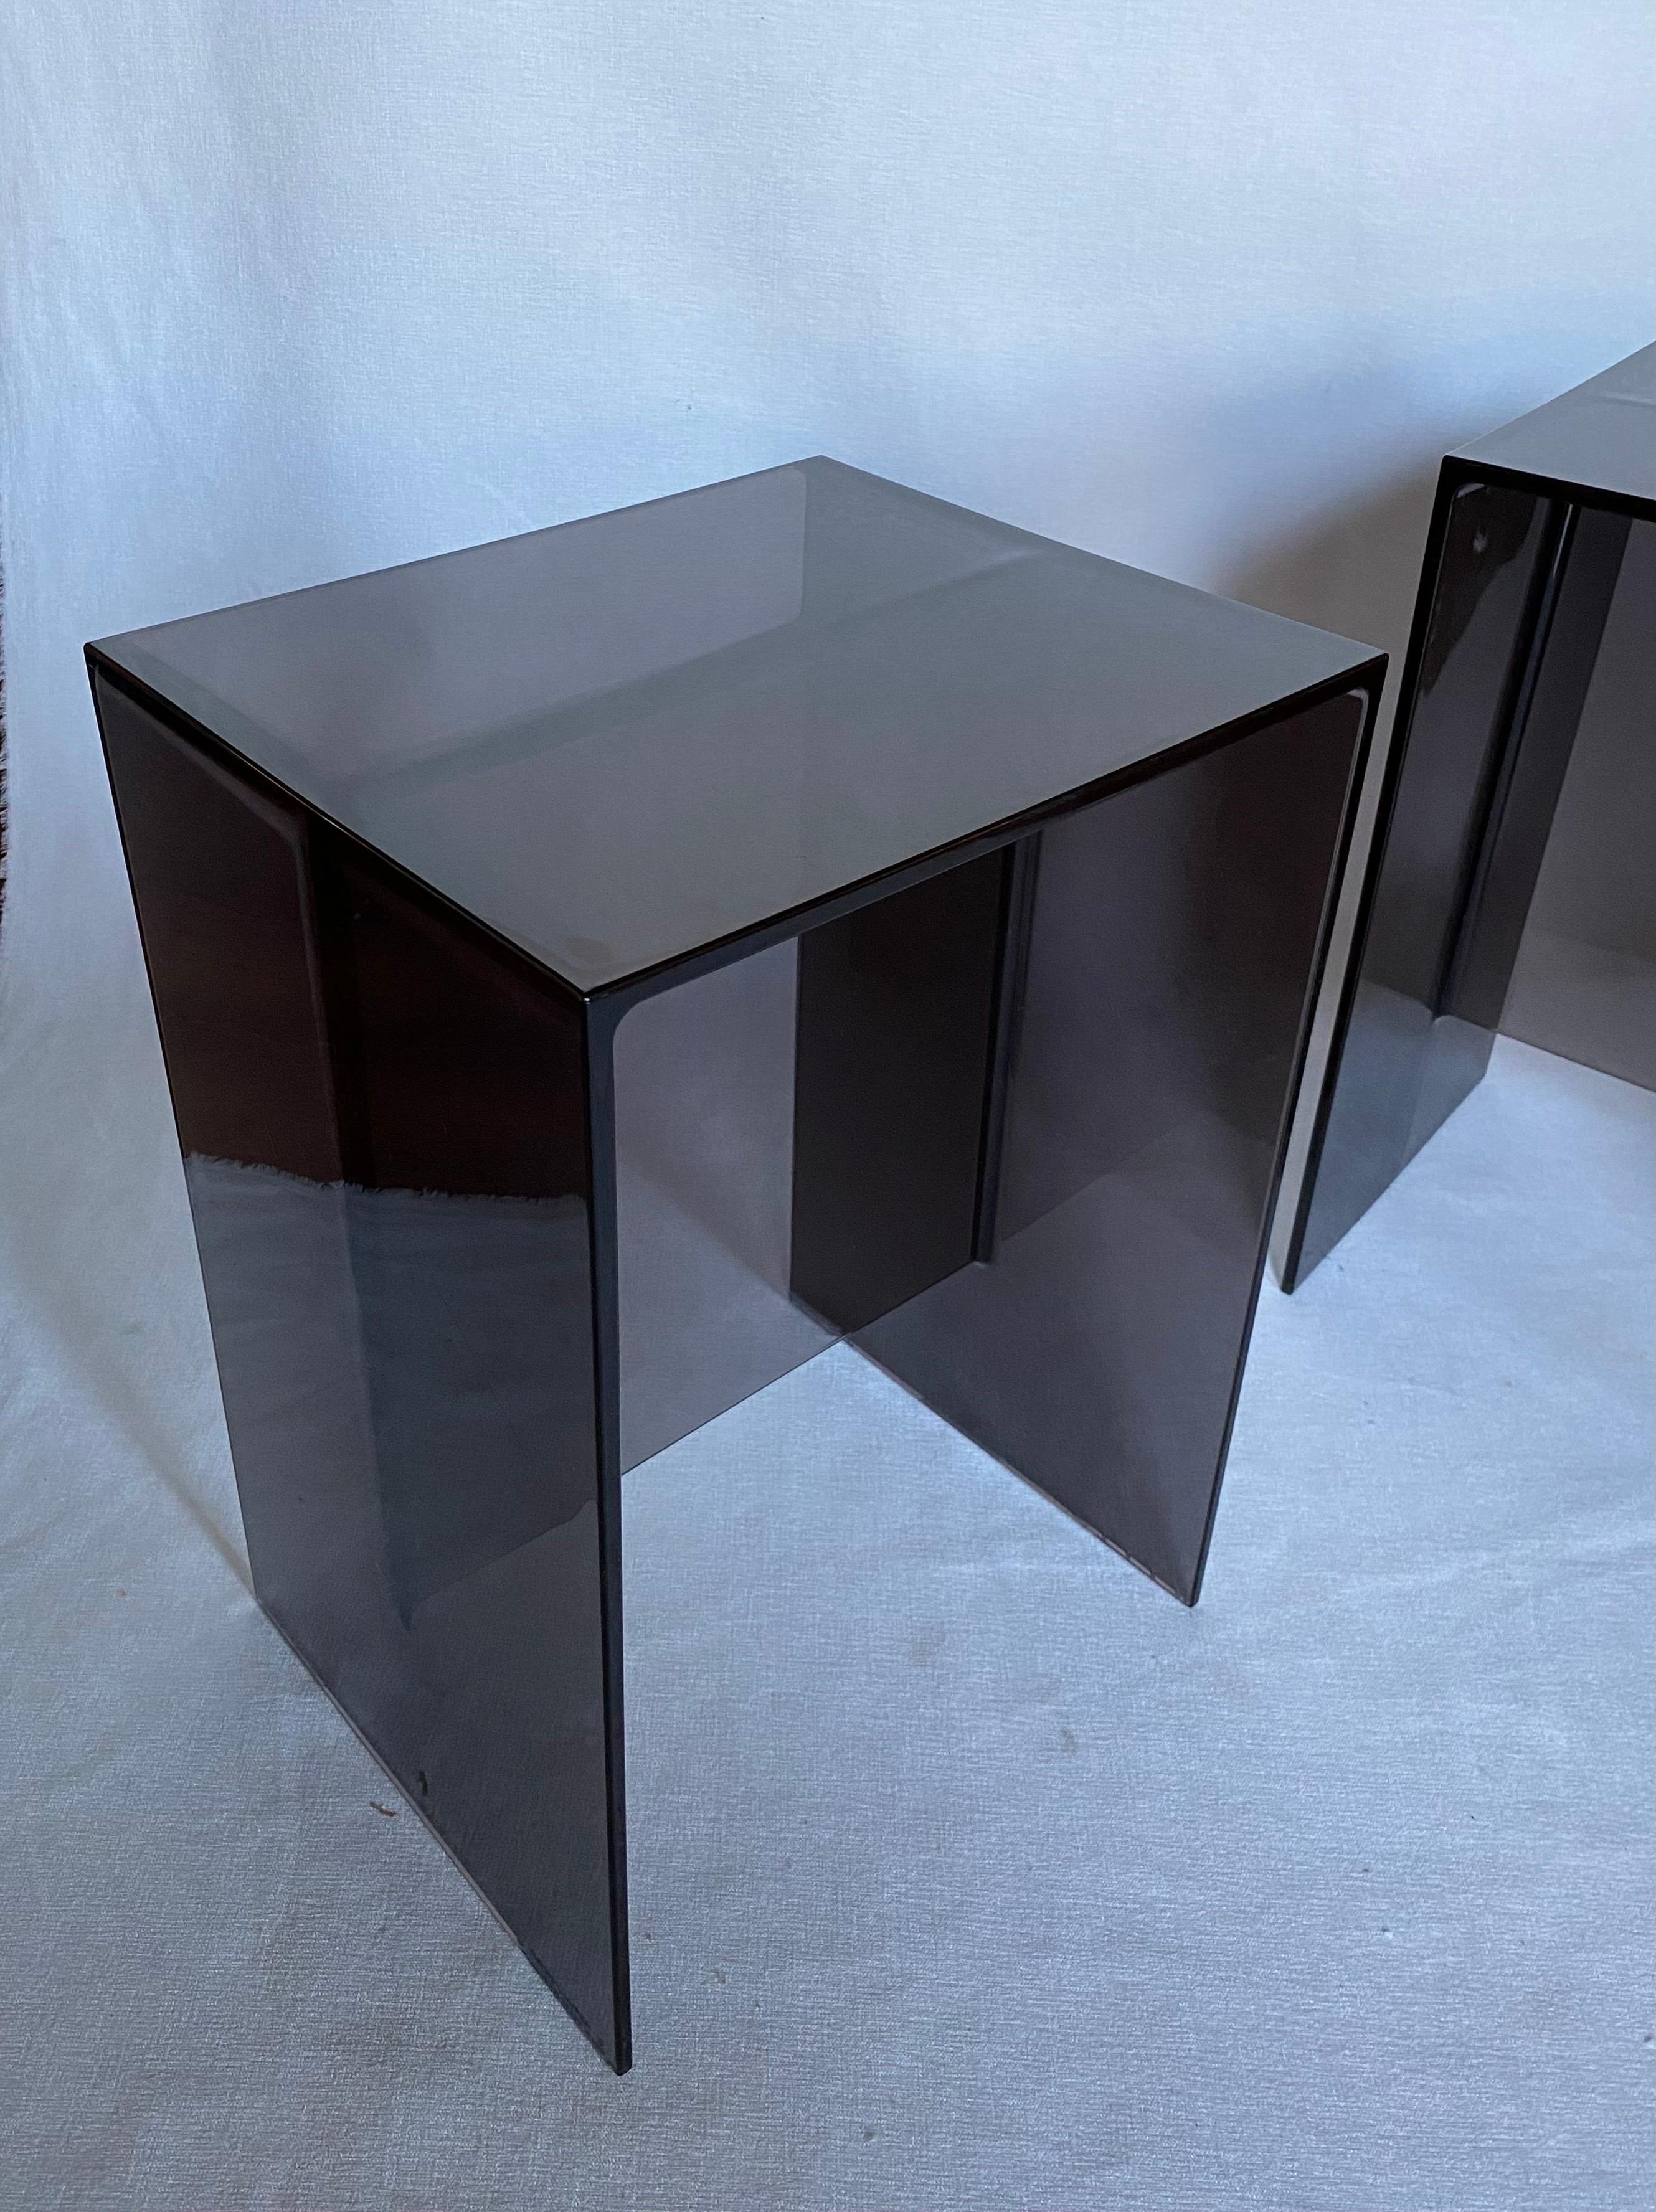 Kartell Max-Beam Modern Acrylic Side Tables by Ludovica + Roberto Palomb, Italy In Good Condition For Sale In Lambertville, NJ